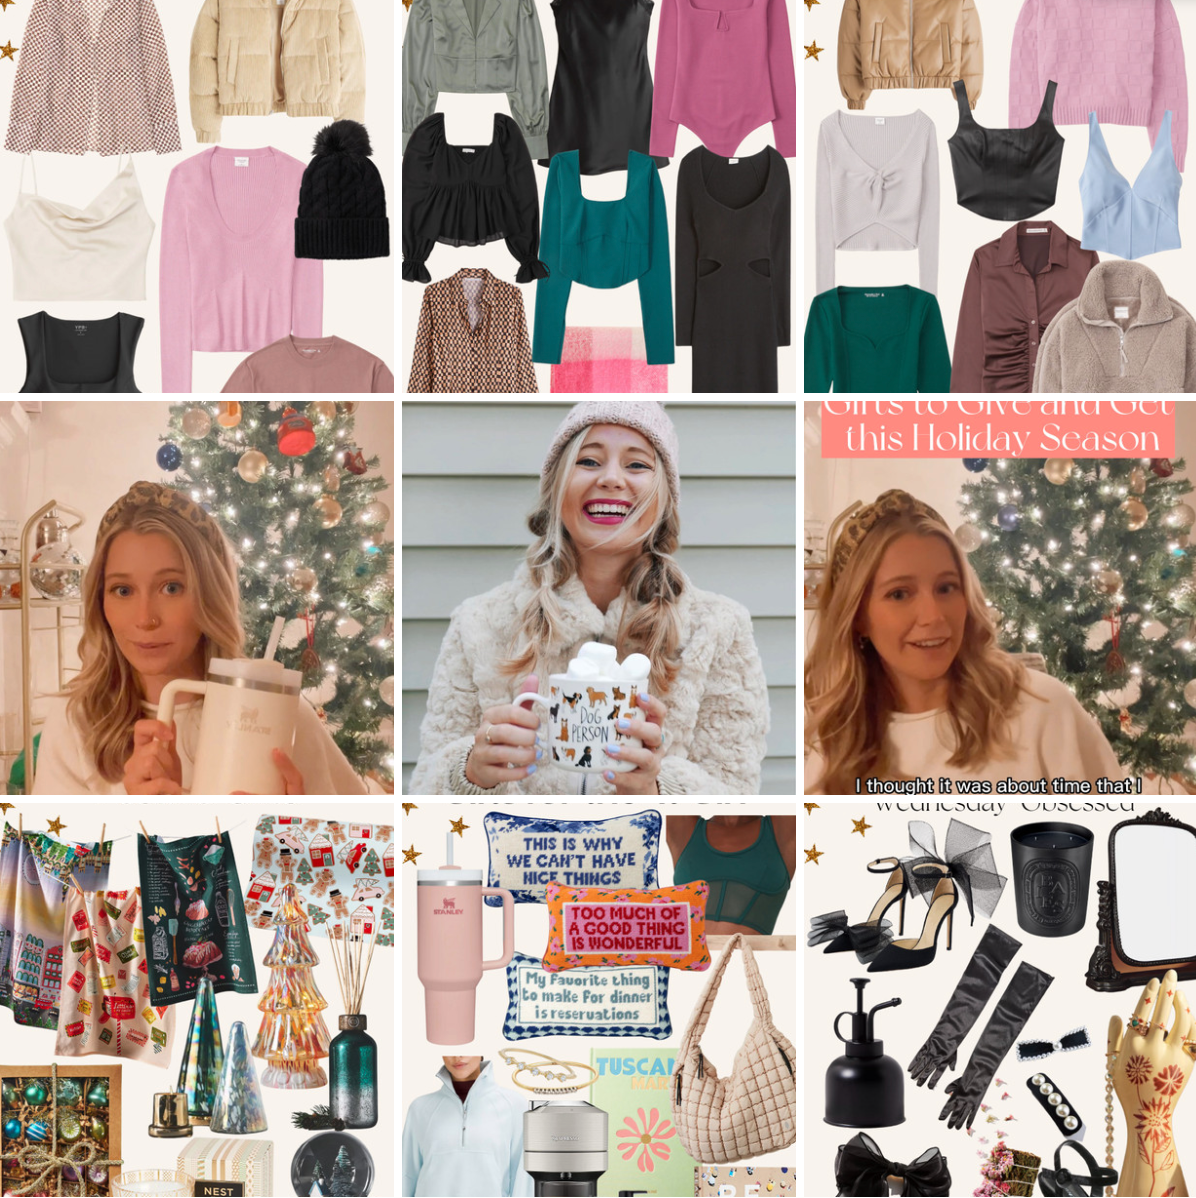 Check out my recent gift guides and outfit posts!